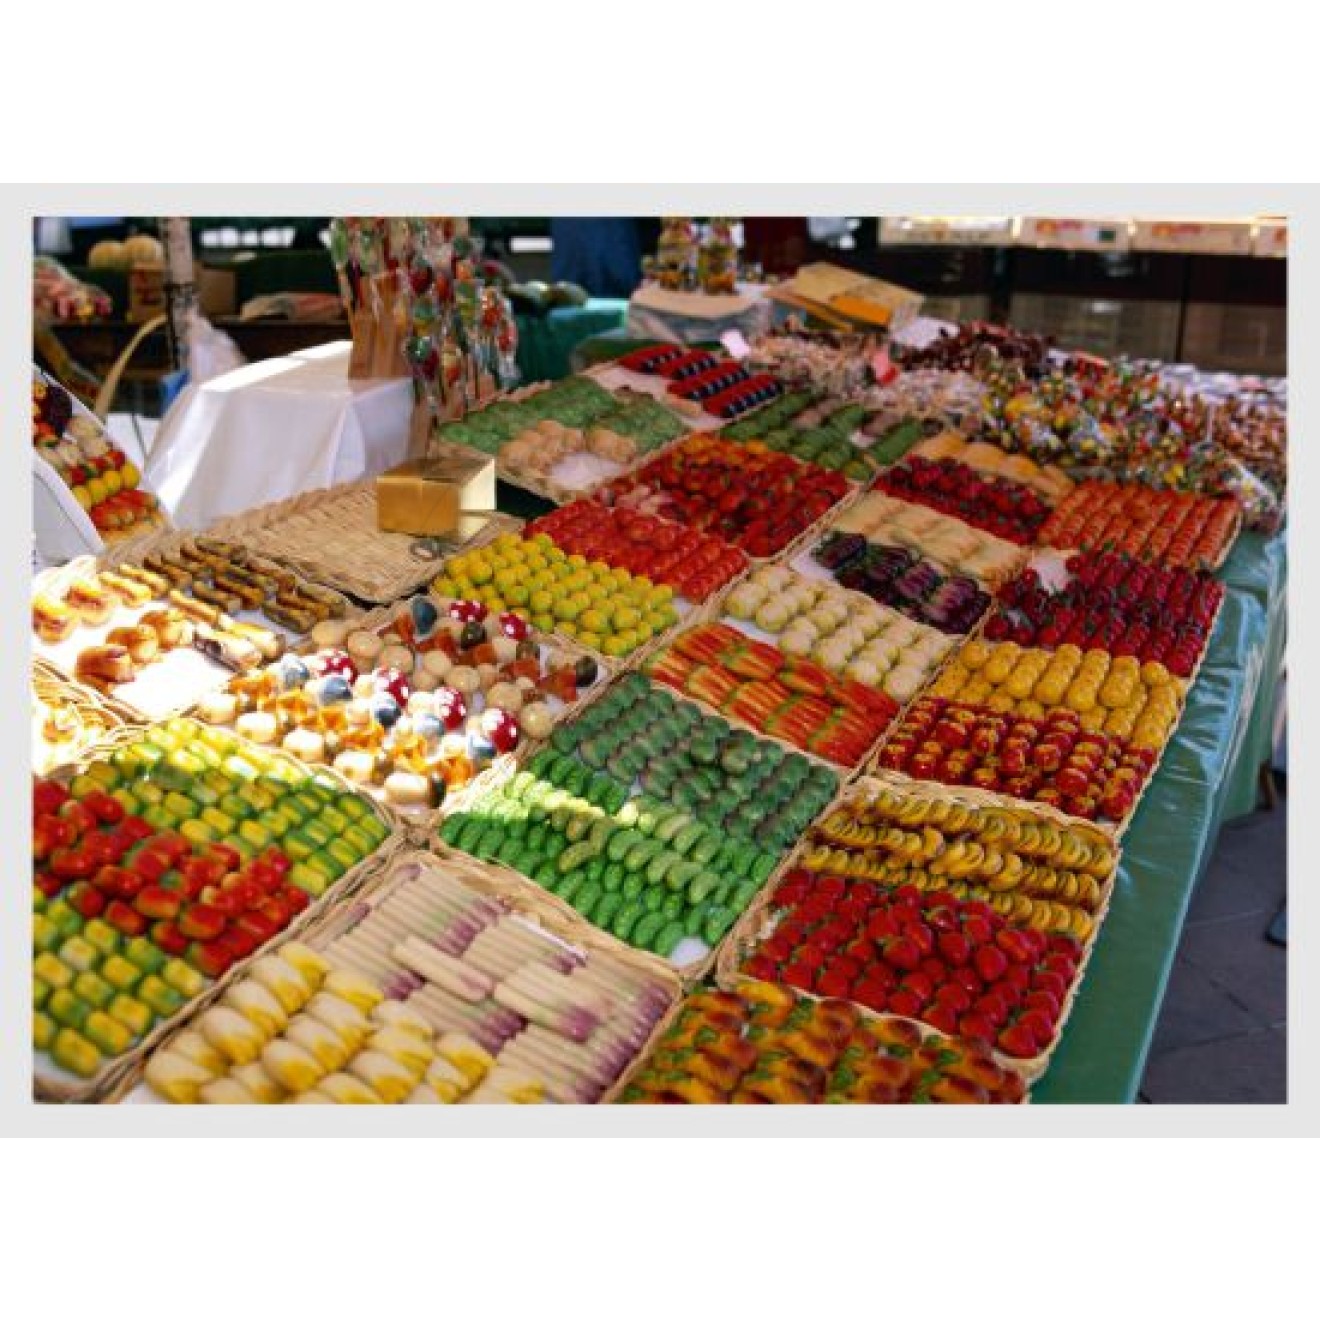 Market stall with fruit and vegetables